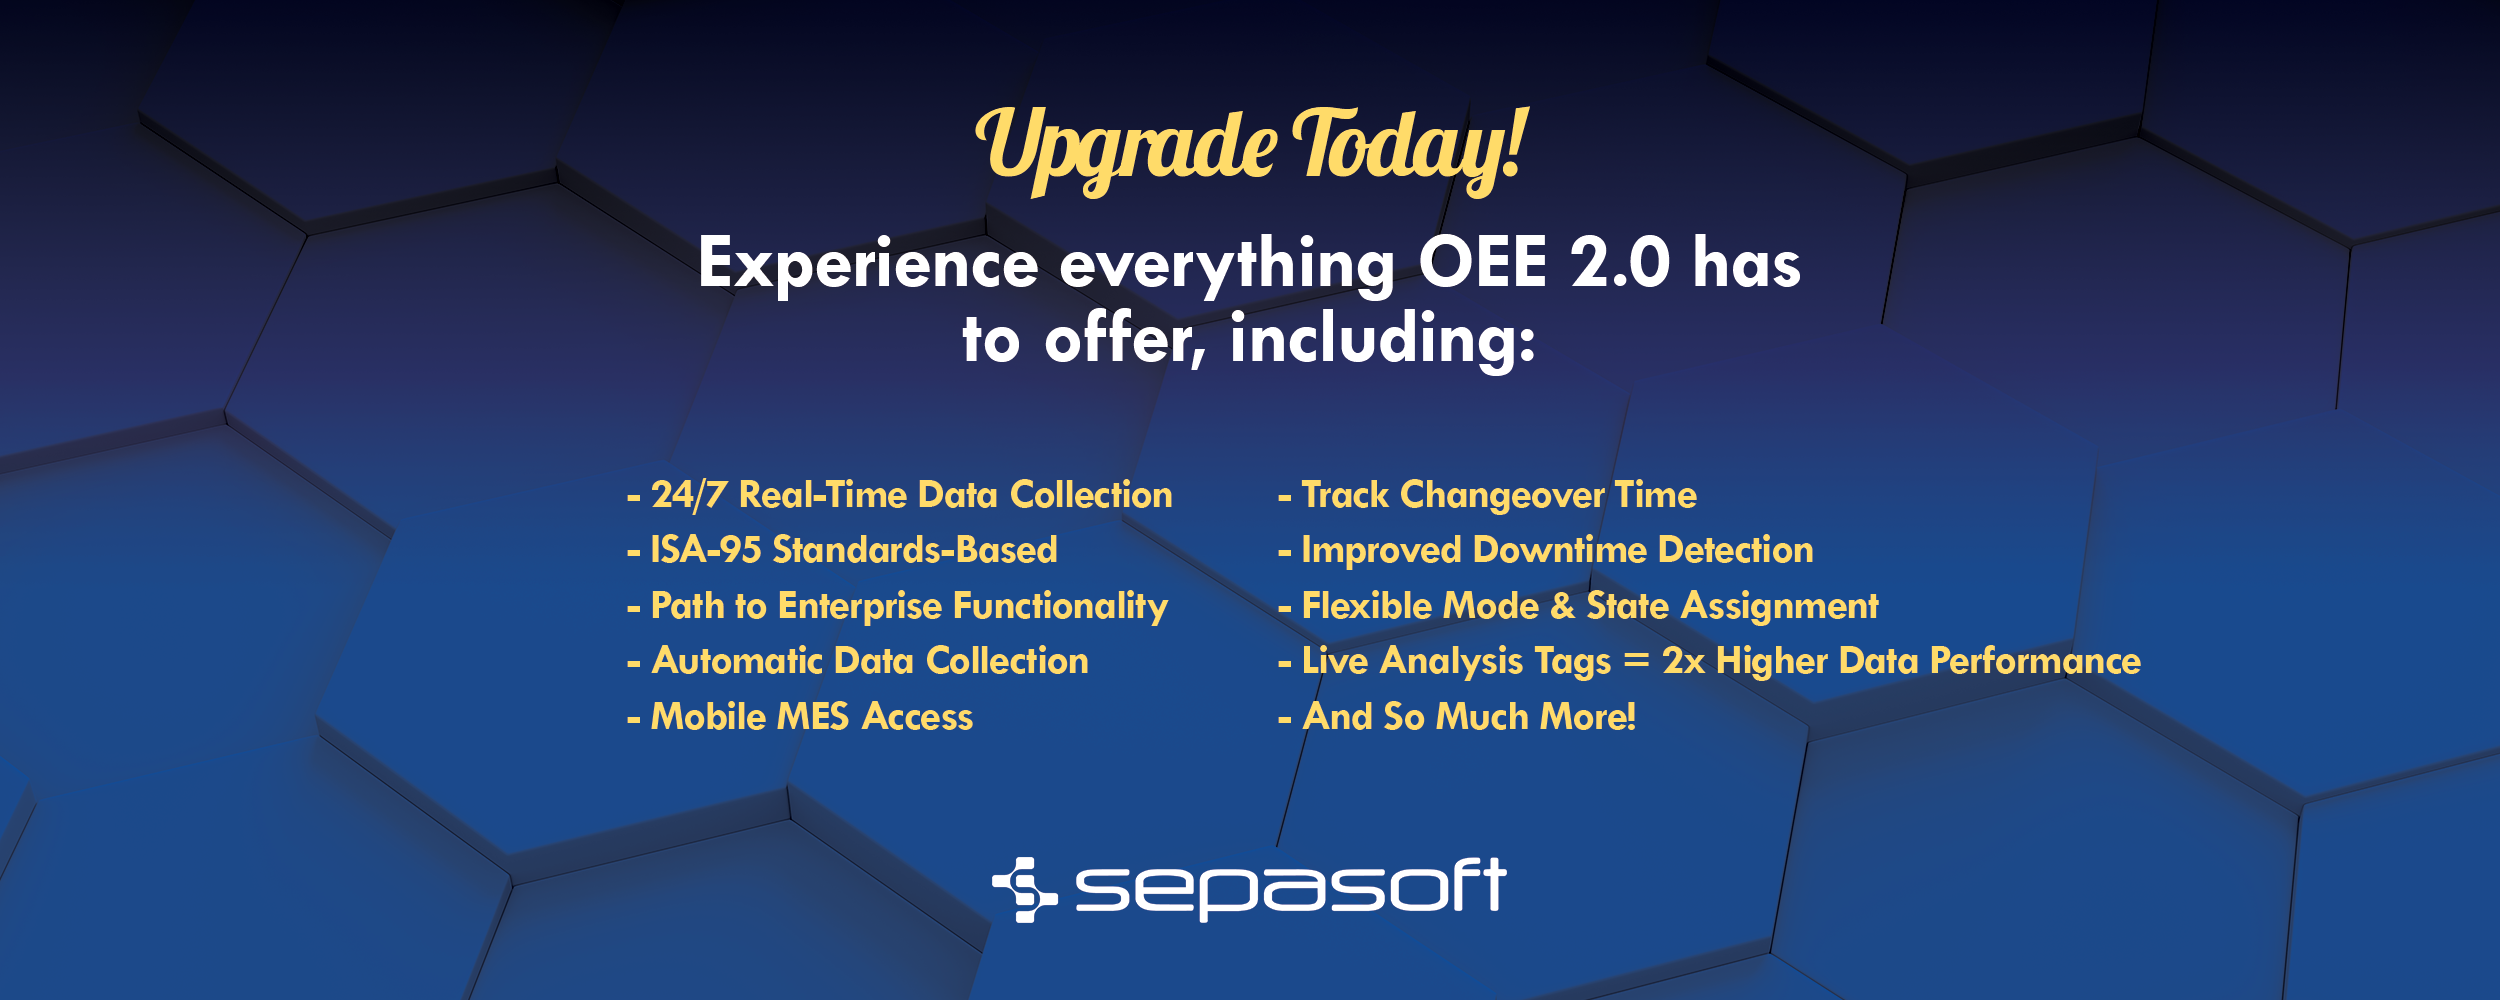 Upgrade from OEE 1.0 to OEE 2.0 Today